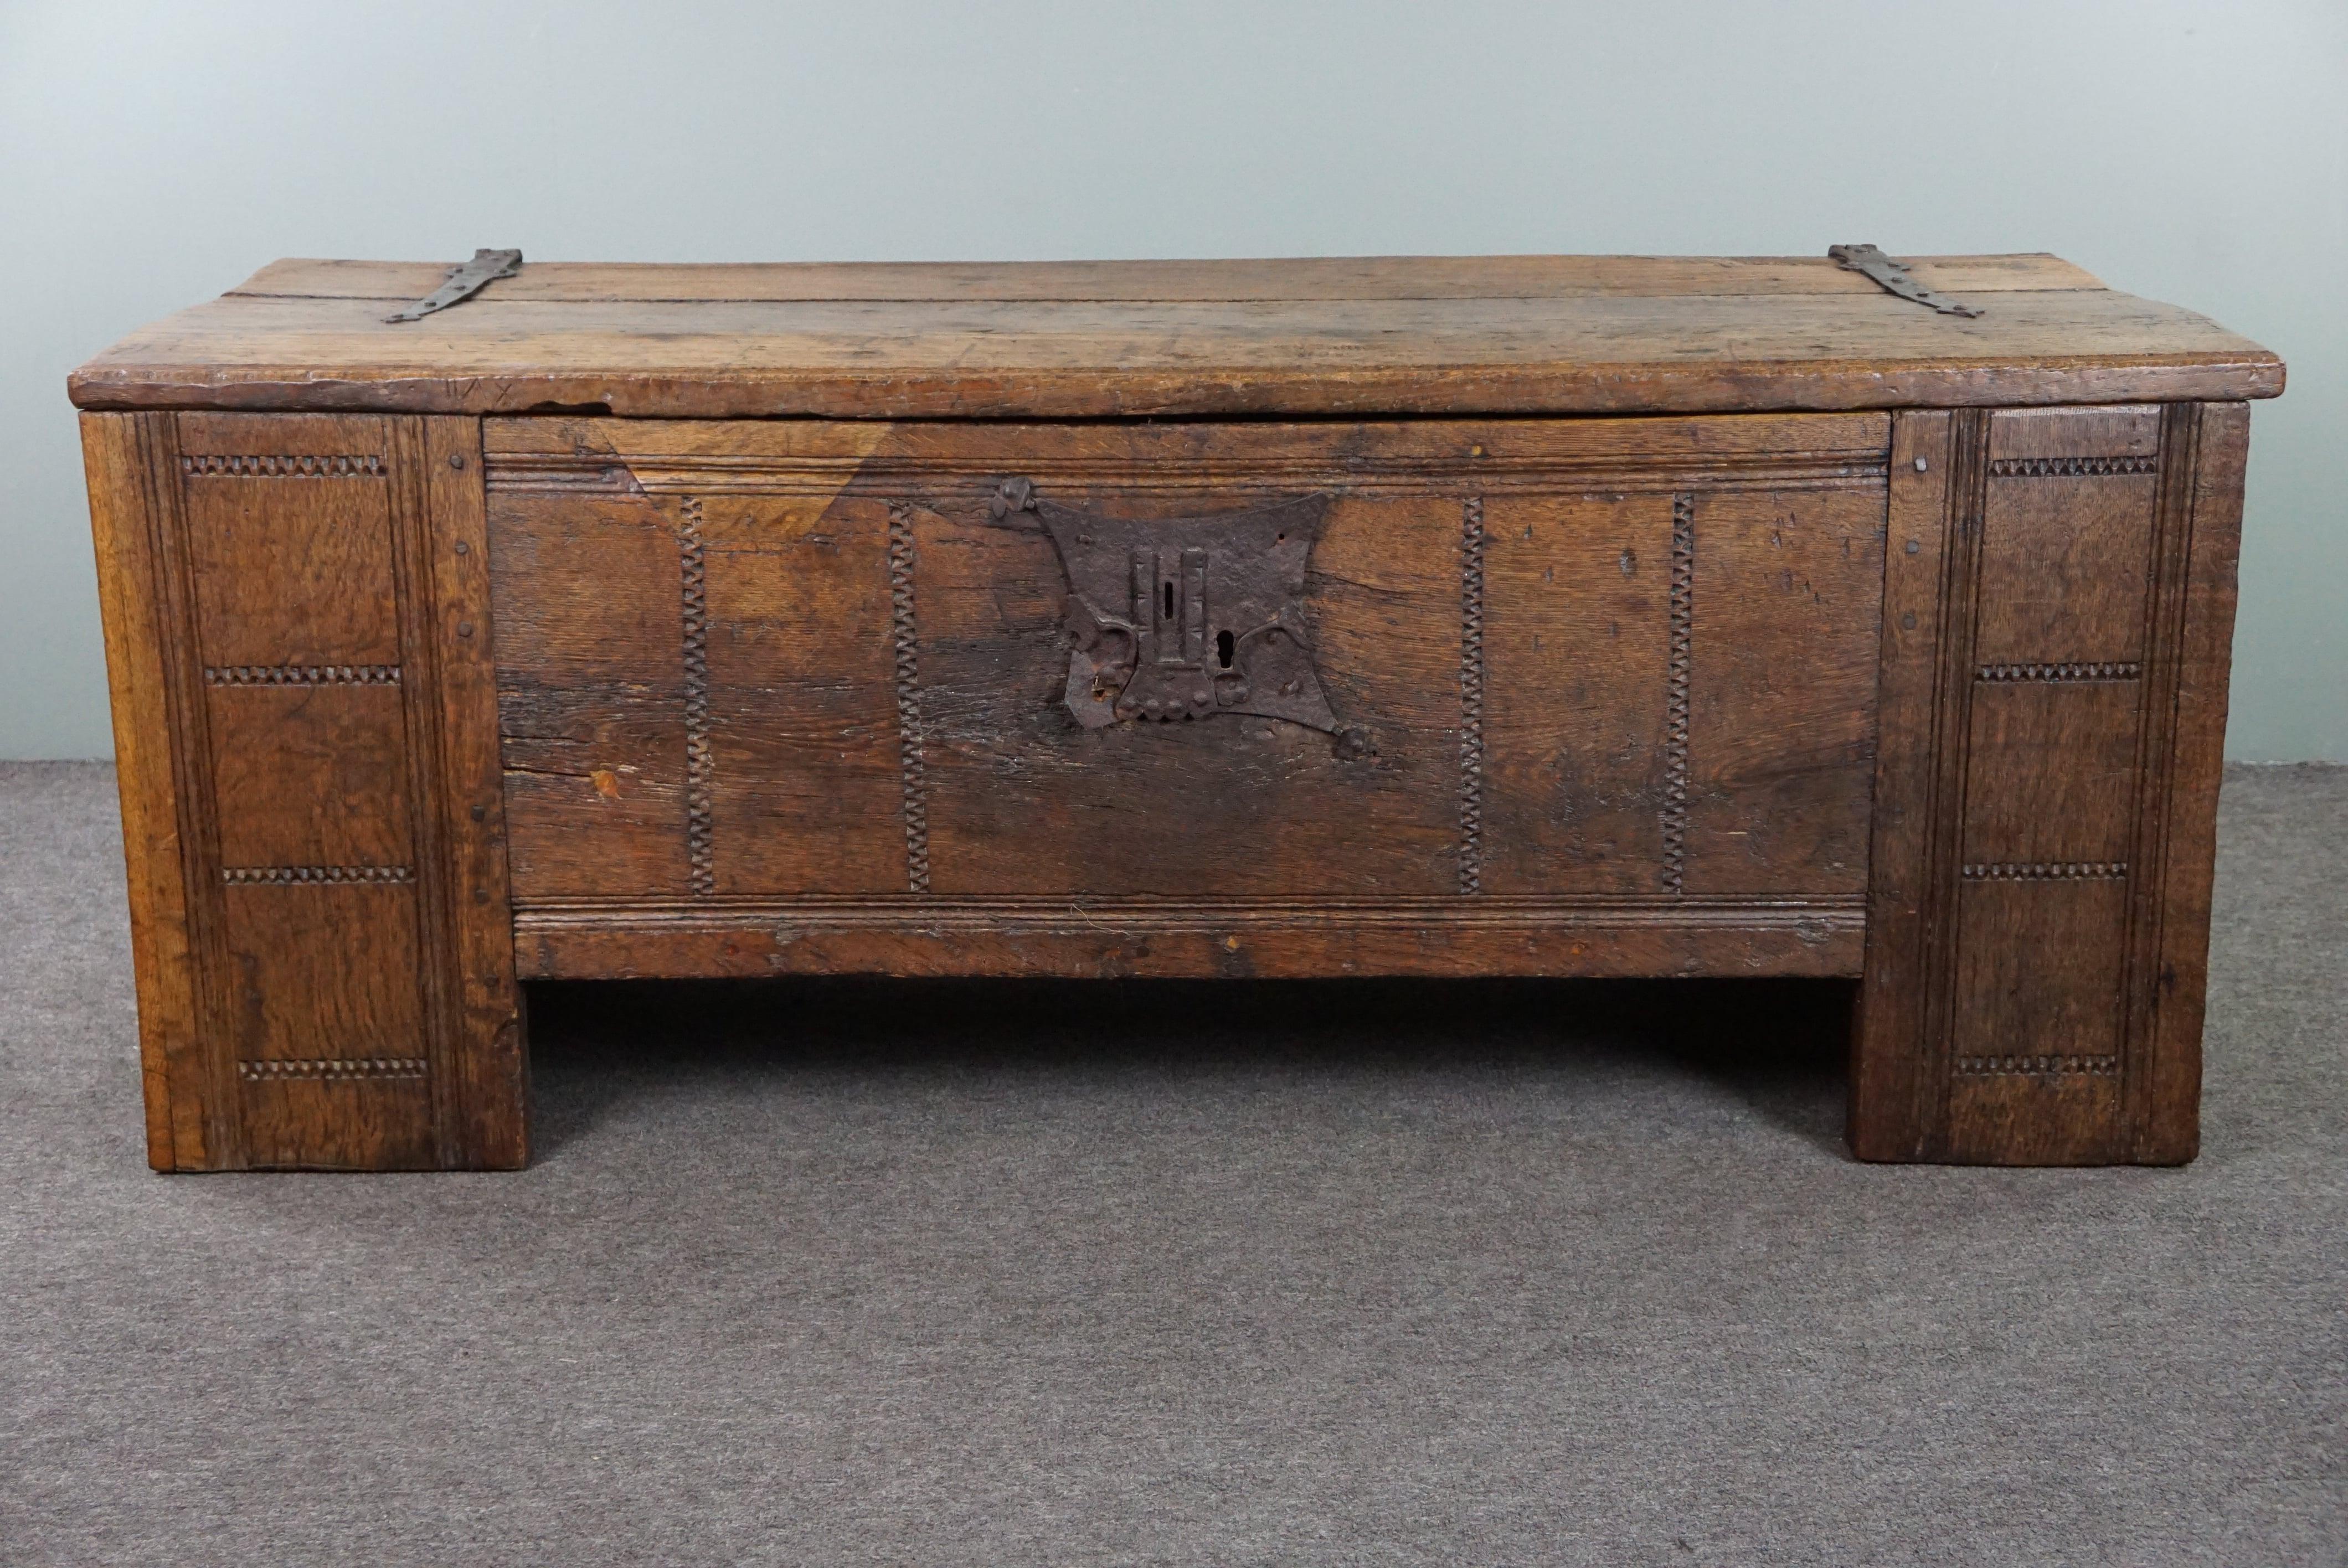 Offered is this large and impressive 16th-century primitive oak chest, which can also serve very well as a coffee table, TV stand, hallway furniture, or toy/storage chest. Large, heavy, impressive, and mostly original. It brings us joy! Consider